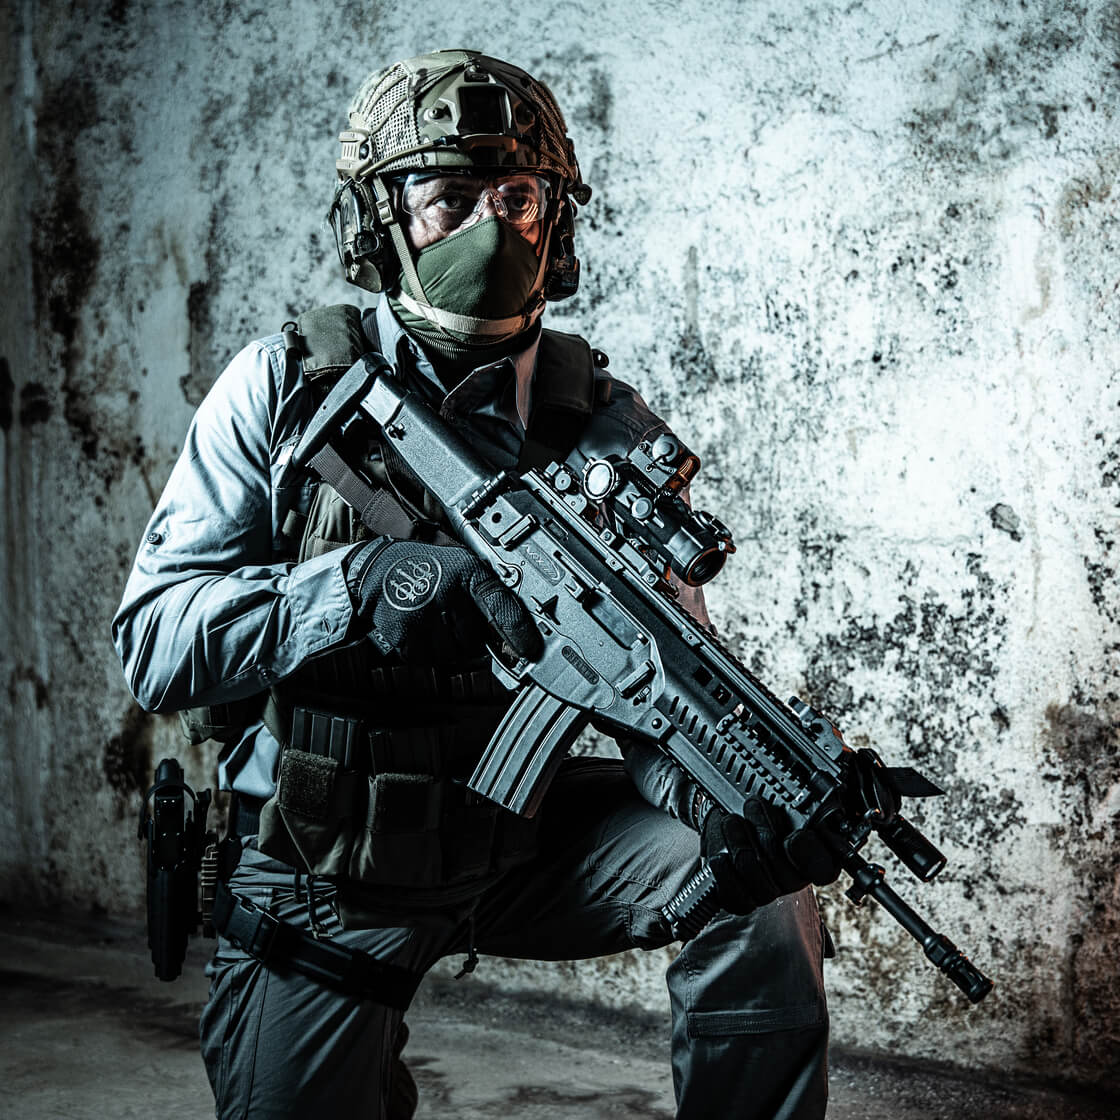 - Tactical Clothing and Footwear for Urban Environments